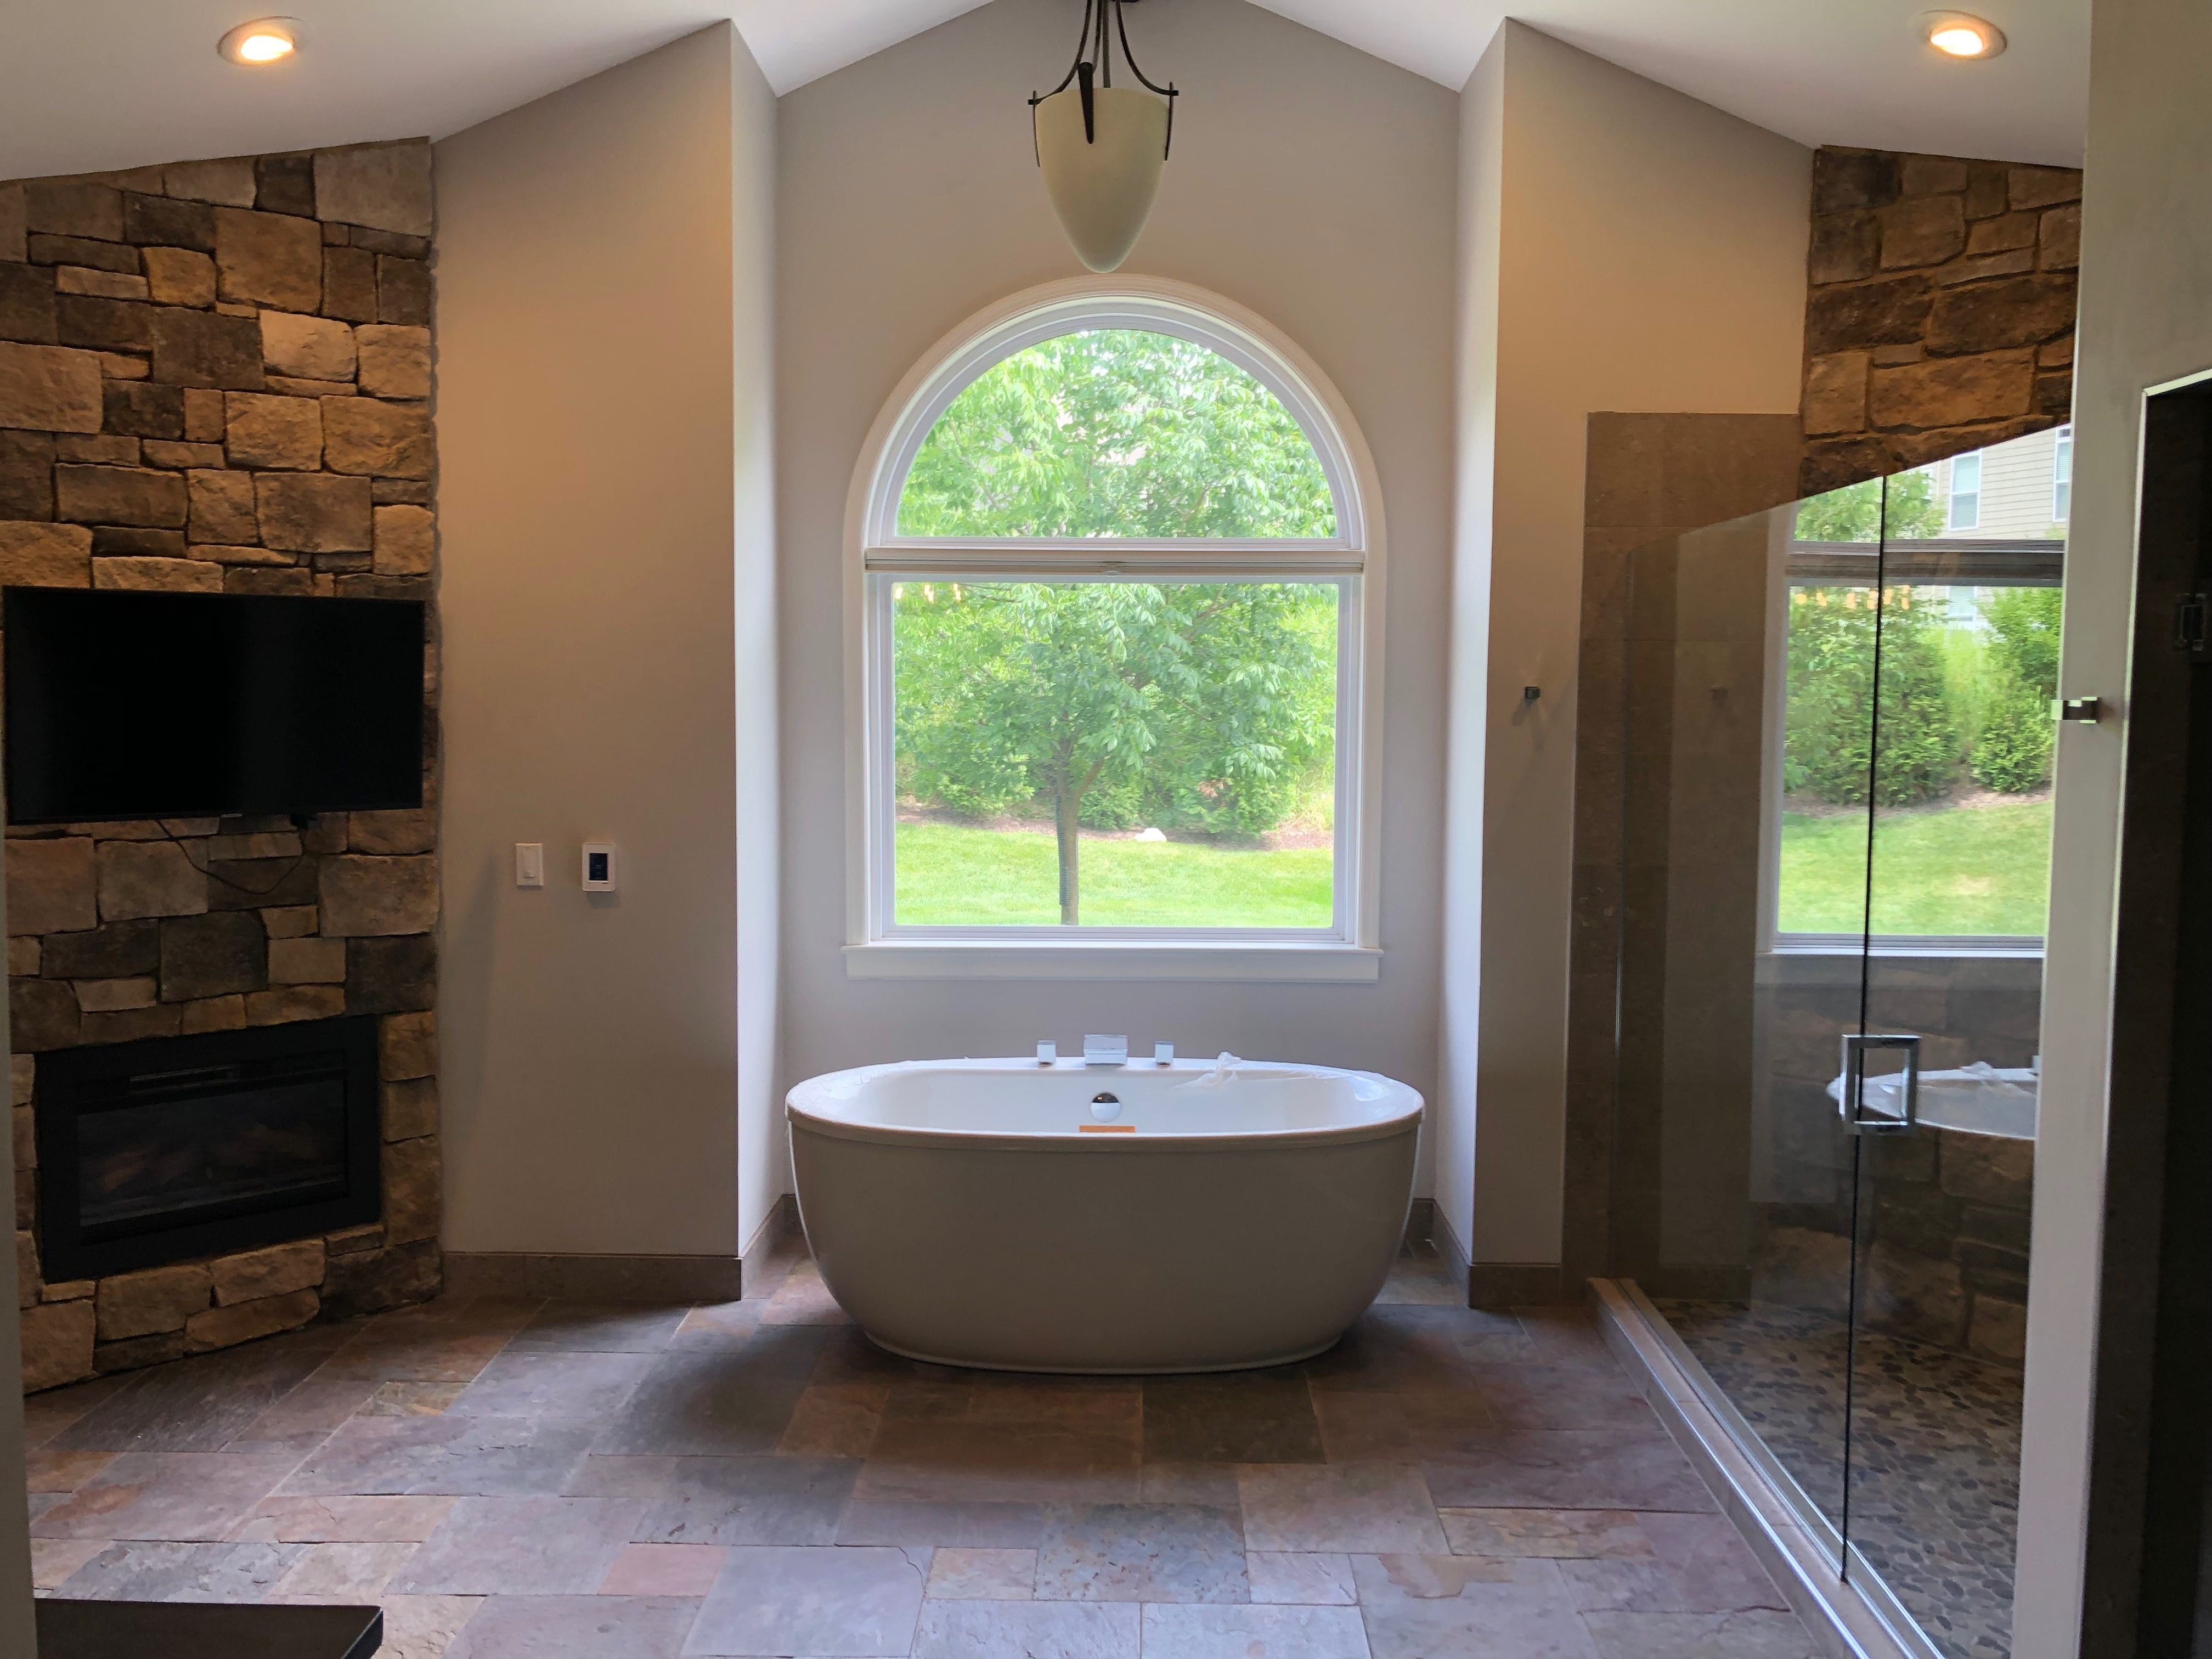 A large master bathroom with freestanding tub done by a skilled bathroom remodeling contractor.